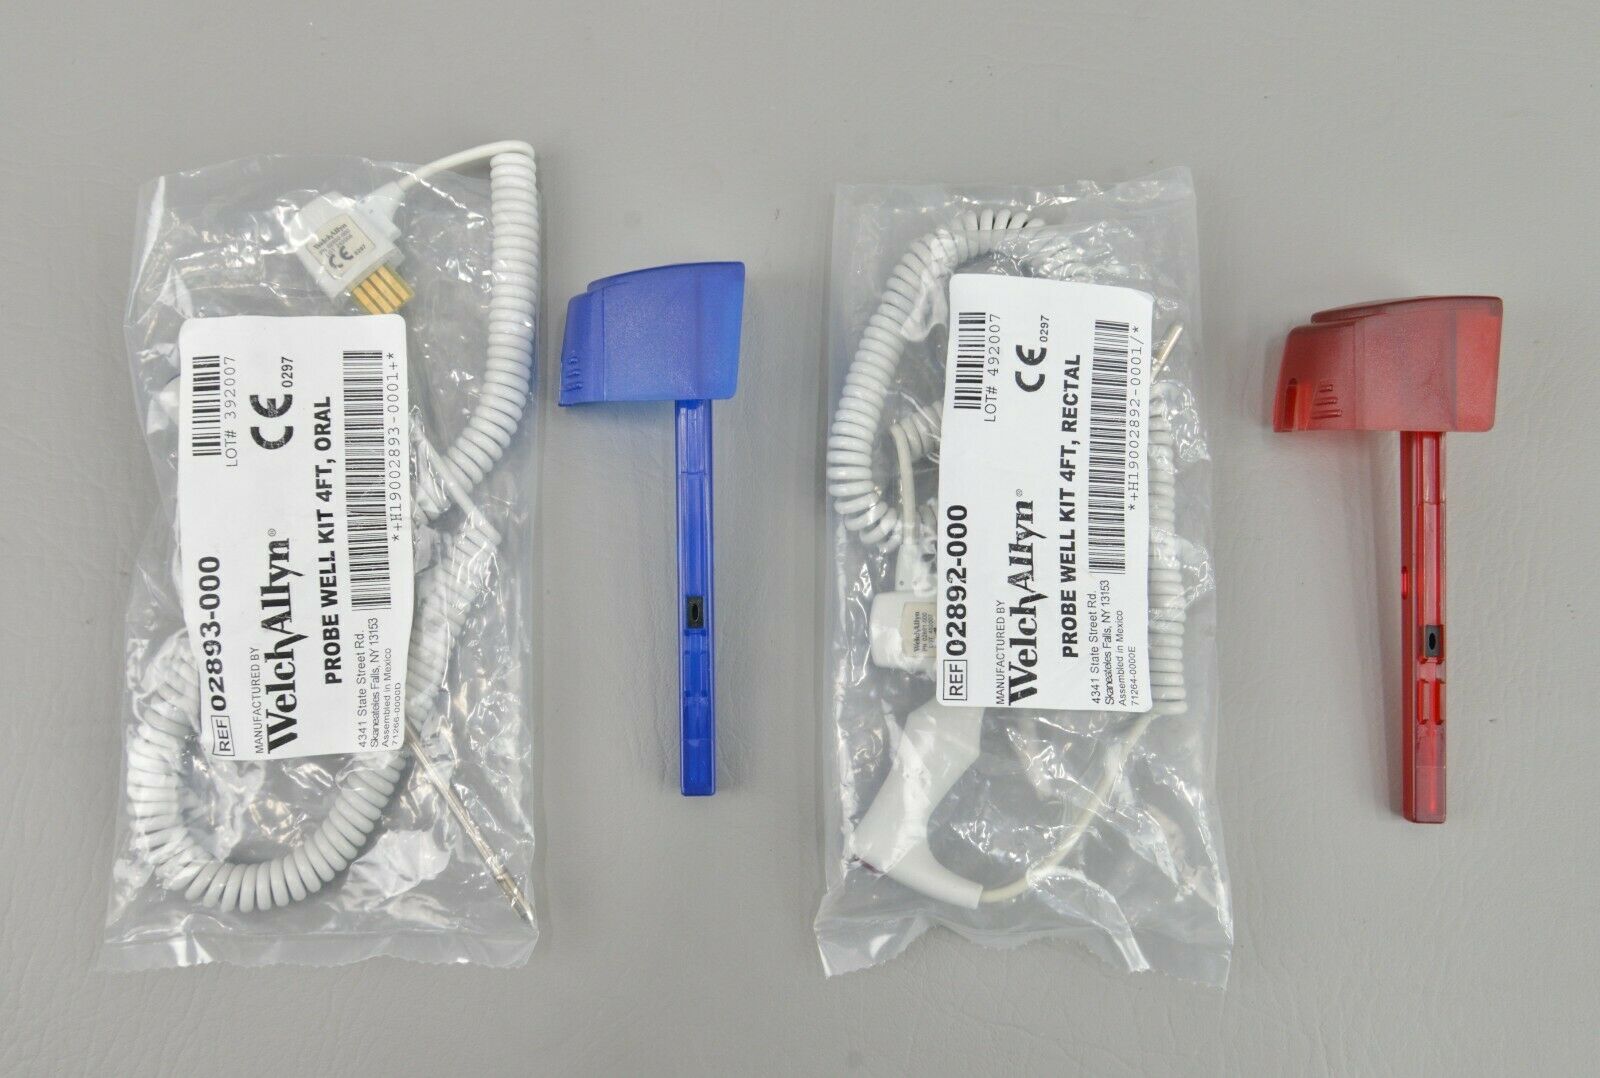 https://www.rhinotradellc.com/wp-content/uploads/imported/8/Welch-Allyn-Model-692-SureTemp-Plus-Thermometer-w-Oral-Rectal-Probes-Case-255337652198-6.JPG